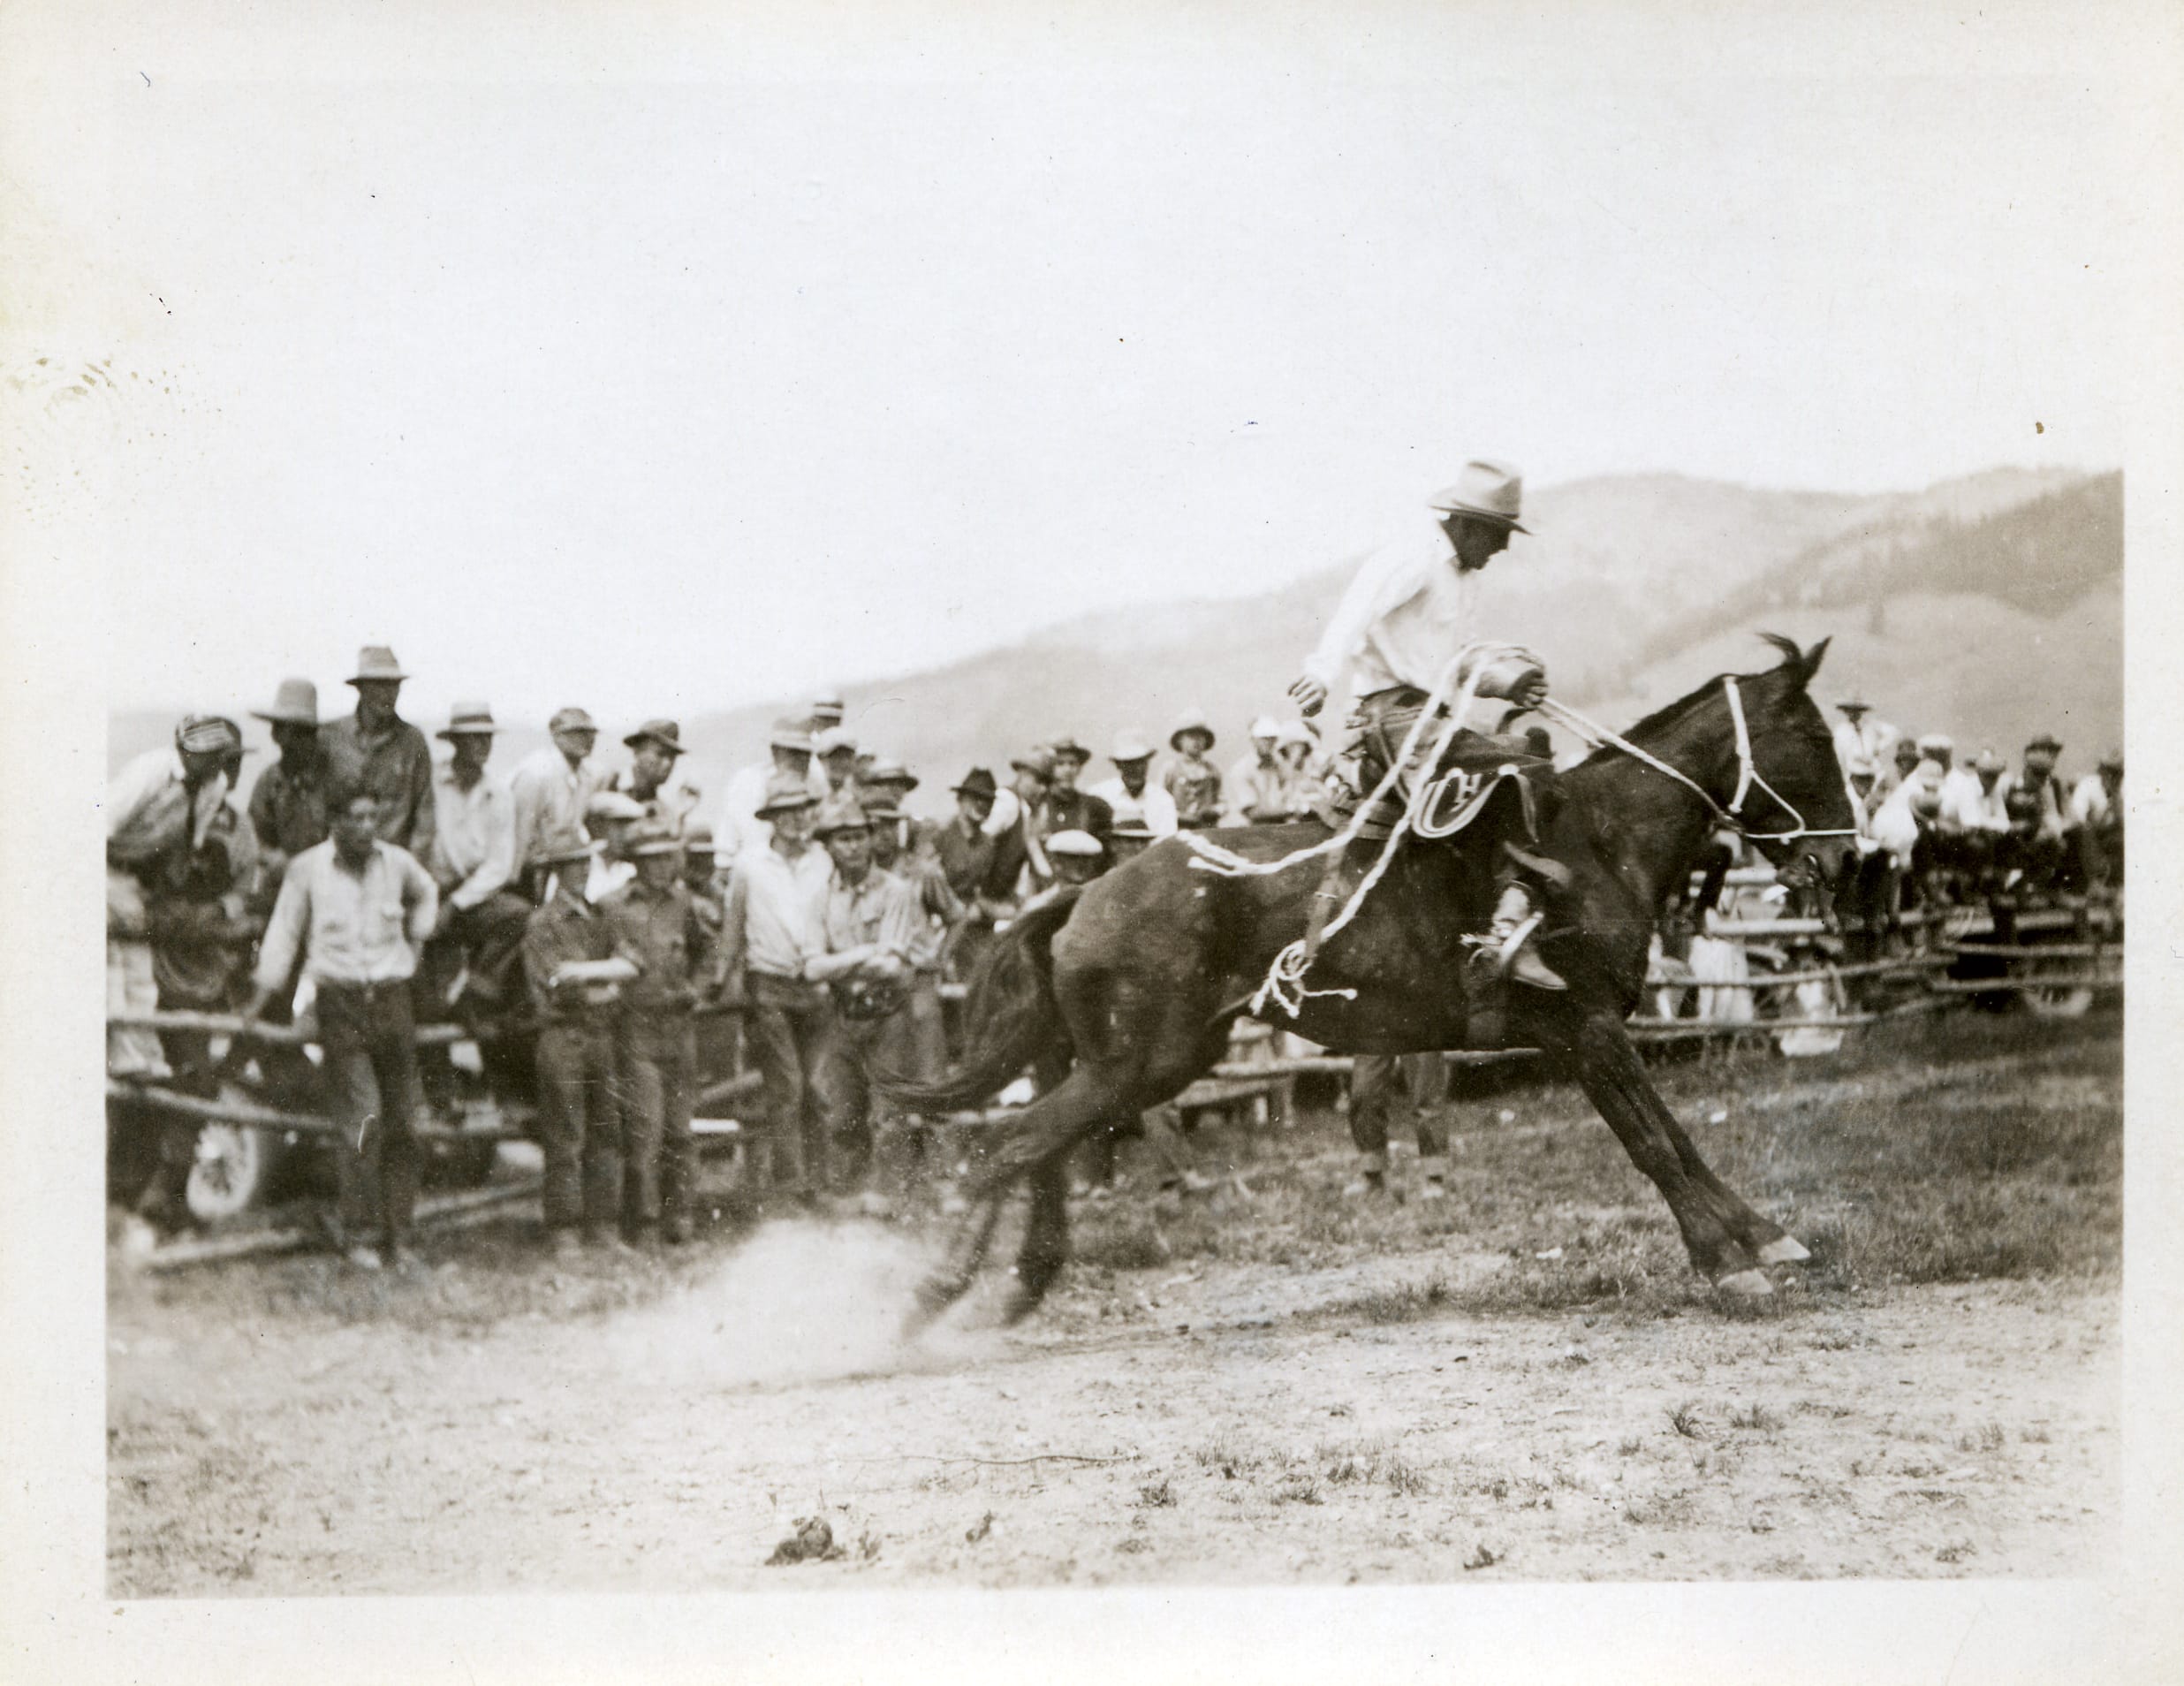 A man riding a horse in front of a crowd.